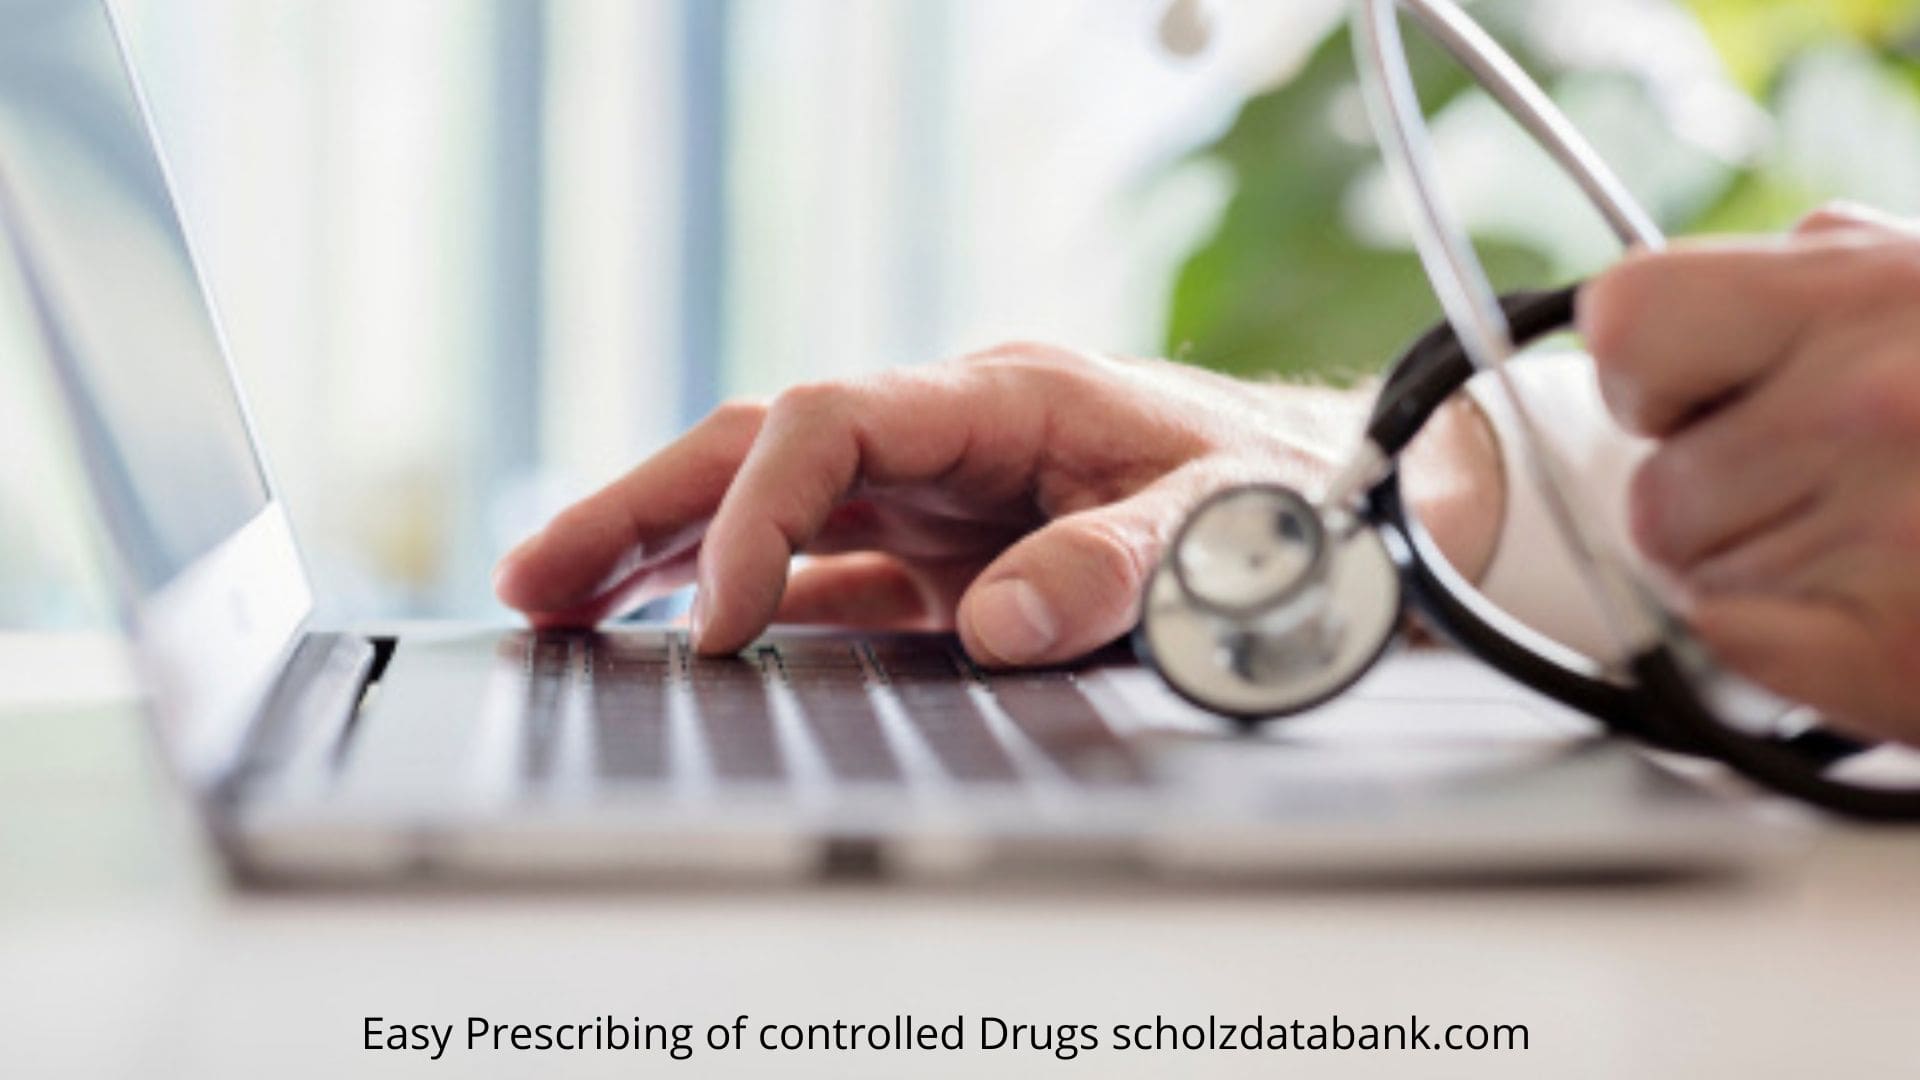 Easy Prescribing of controlled Drugs  